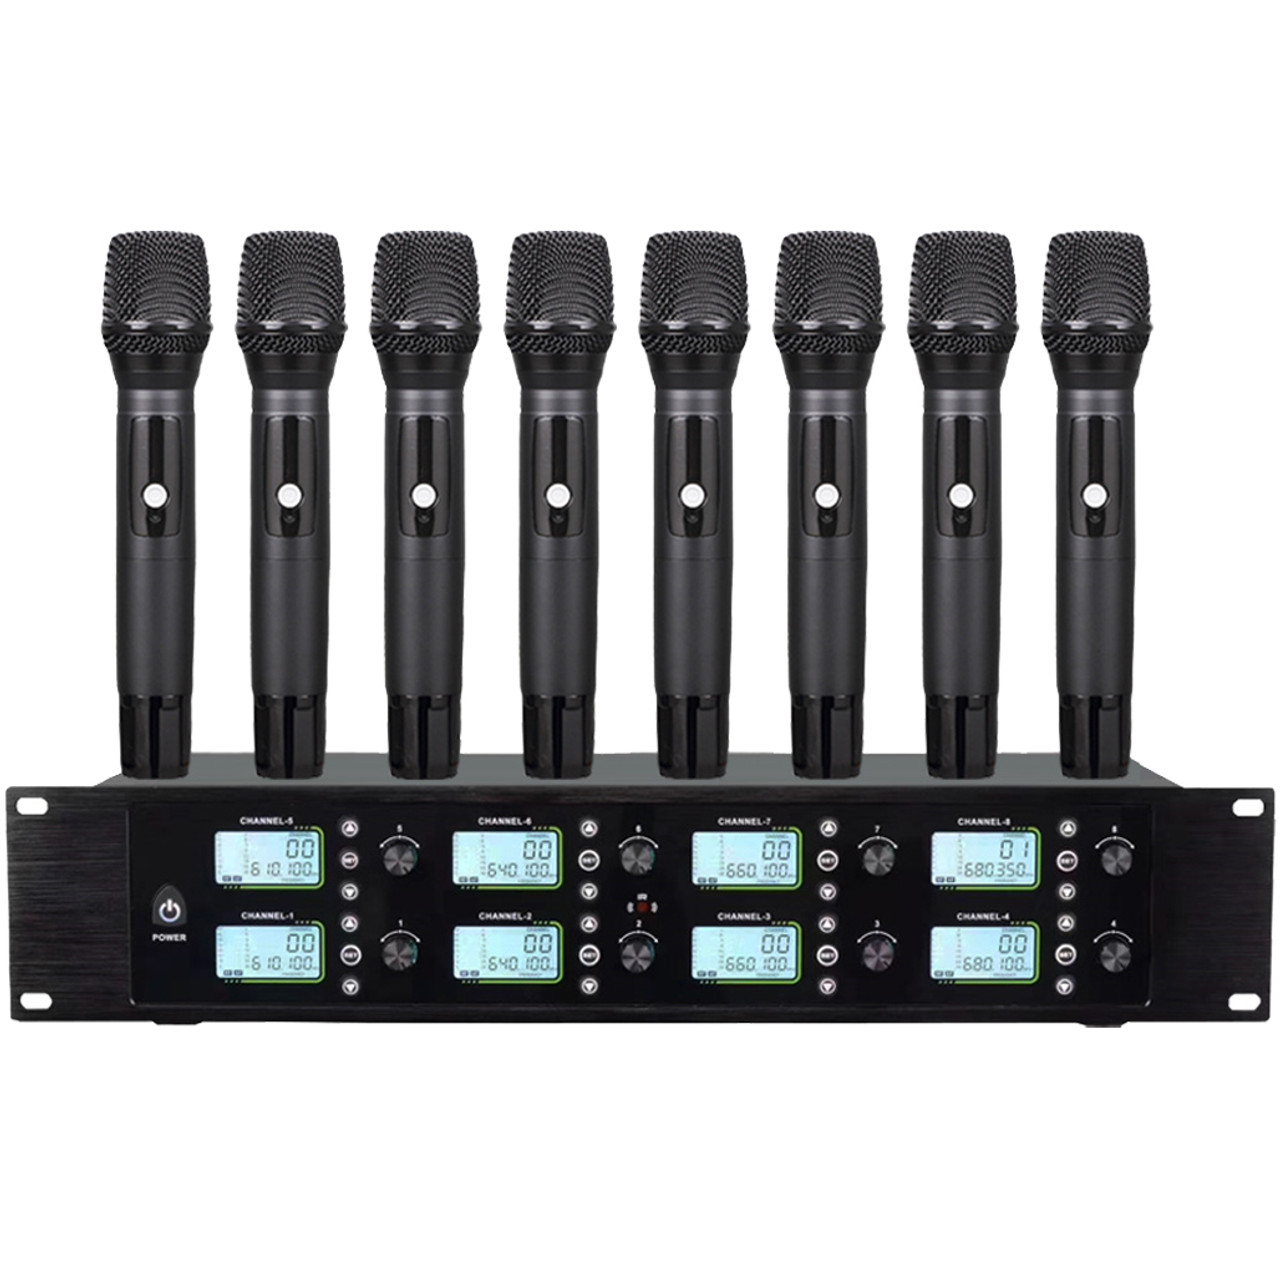 UHF Professional Wireless Microphone 8 Channel (H21)